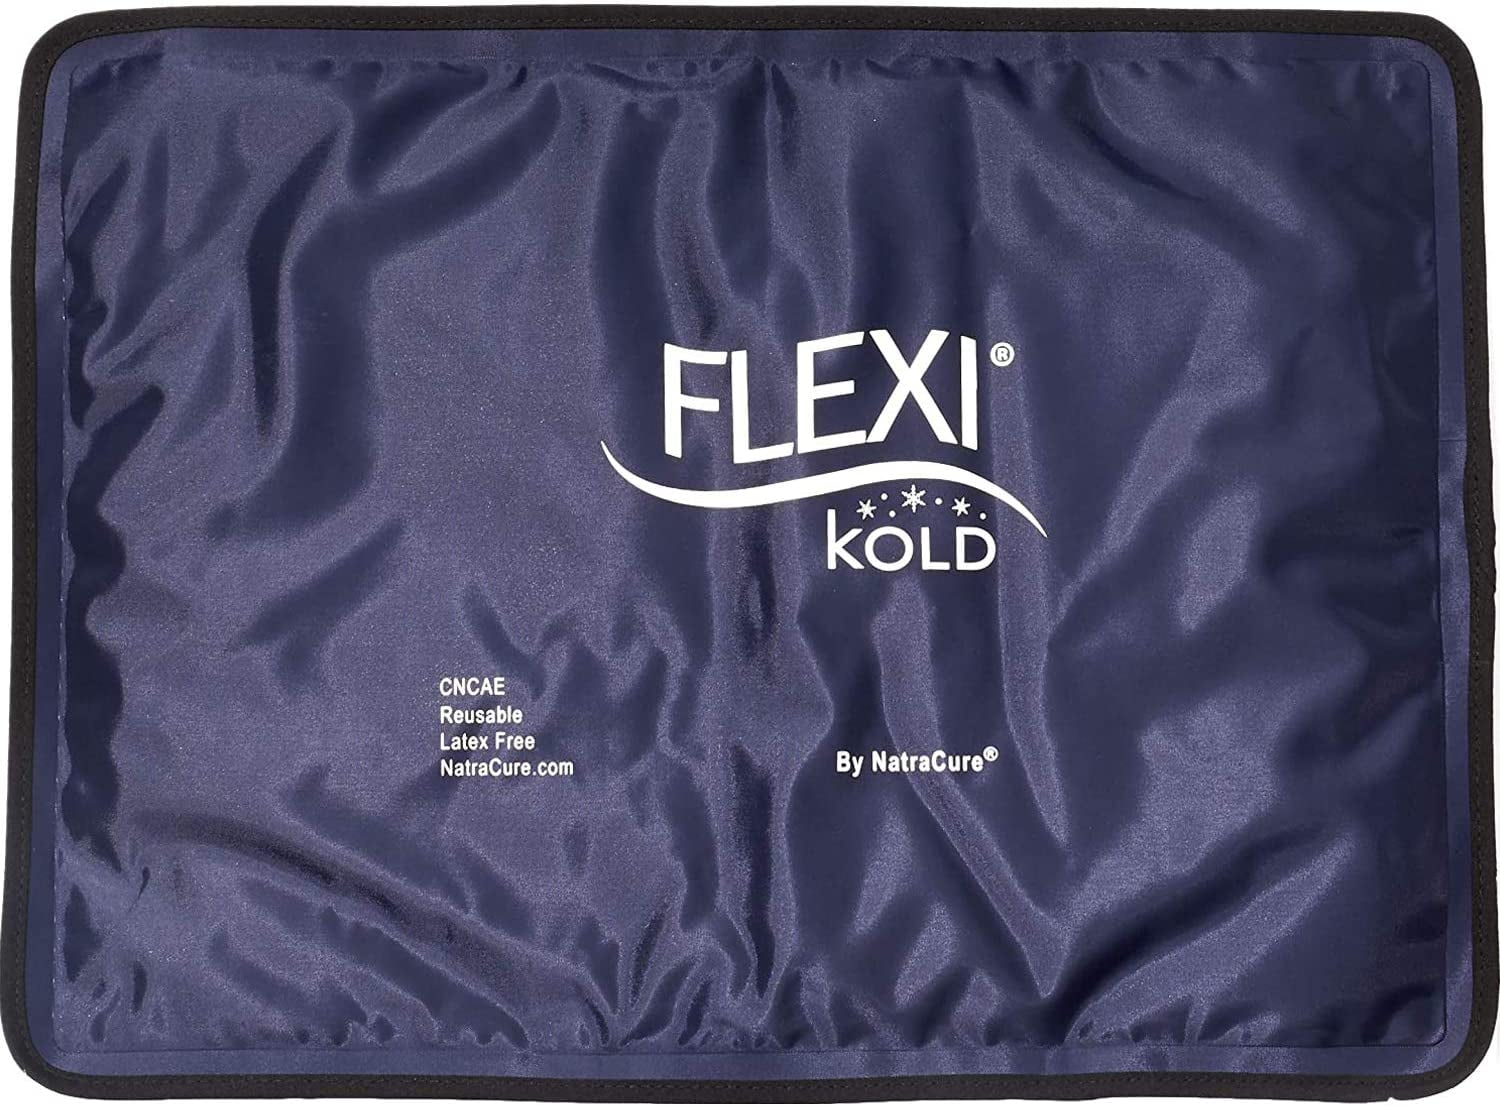 Ice Lock Reusable Ice Bag For Coolers - Just Add Ice Cubes